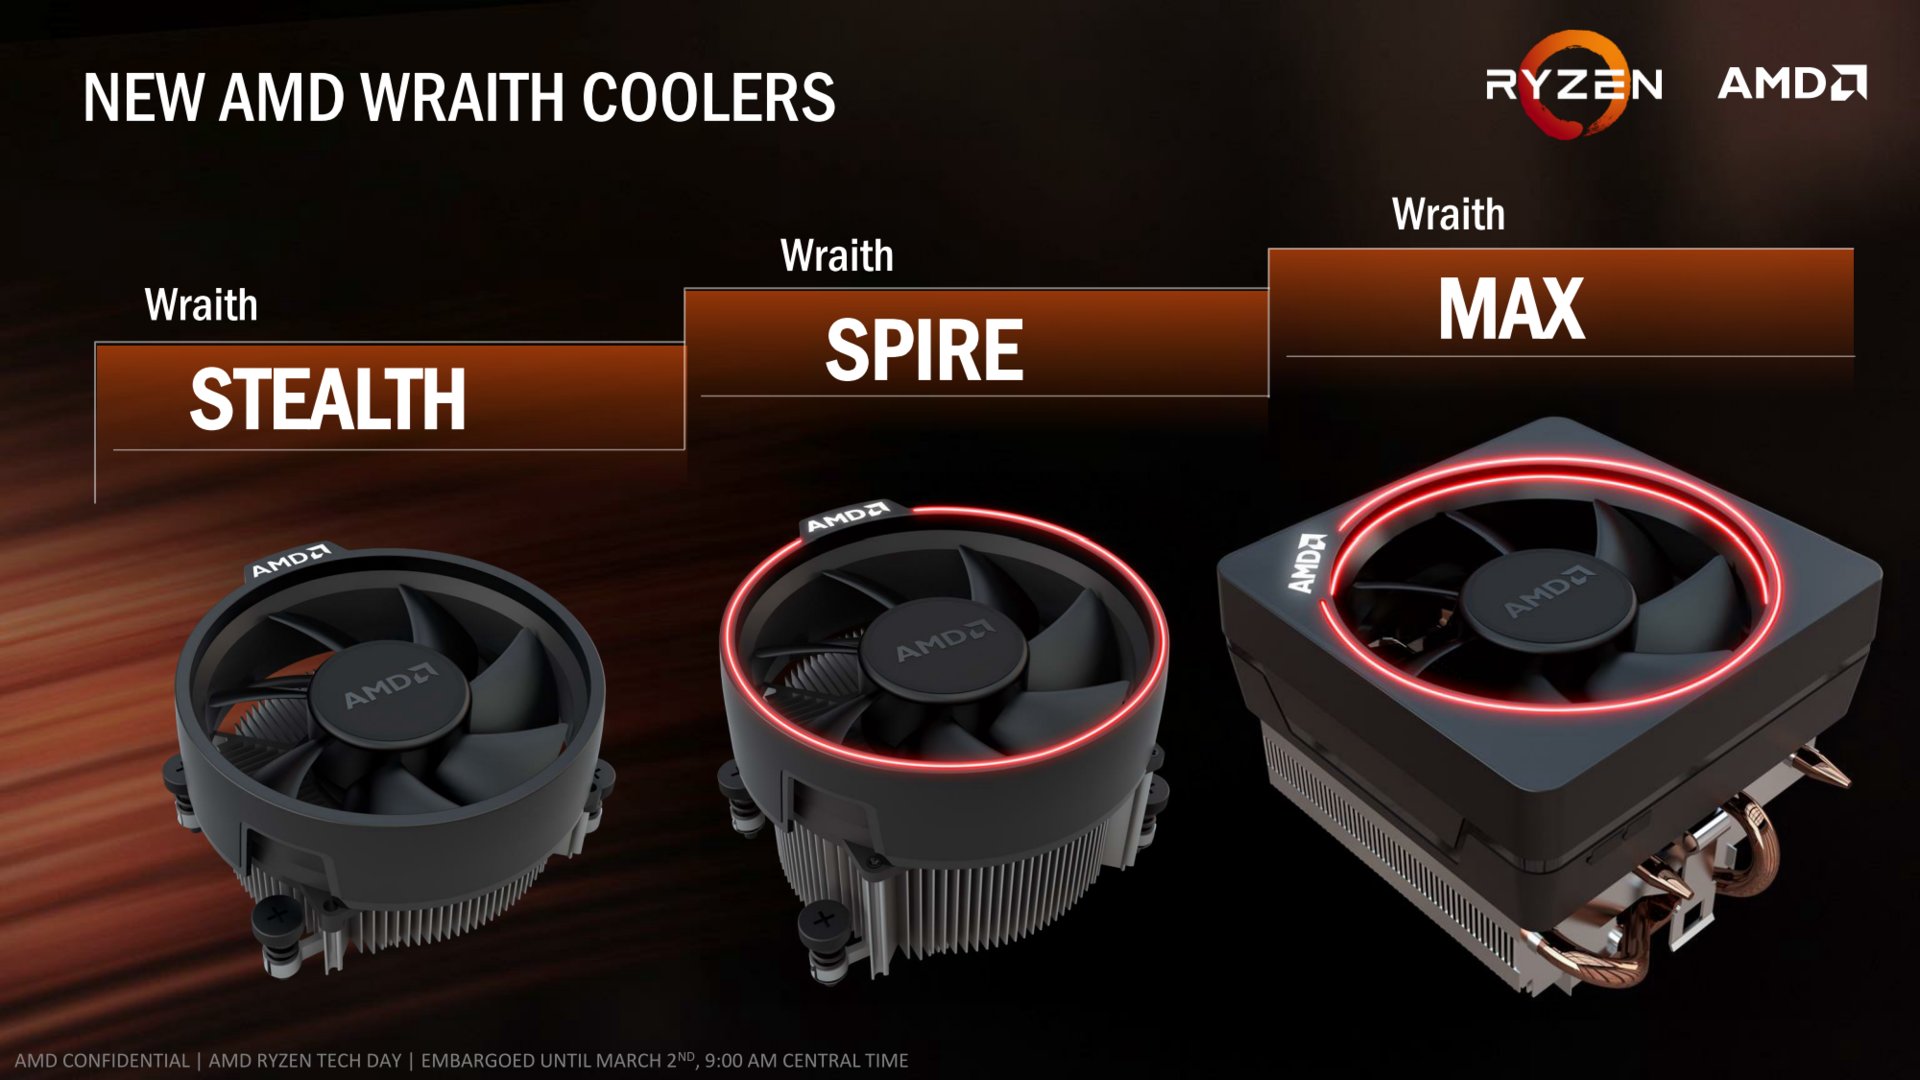 The boxed cooler for AMD Ryzen